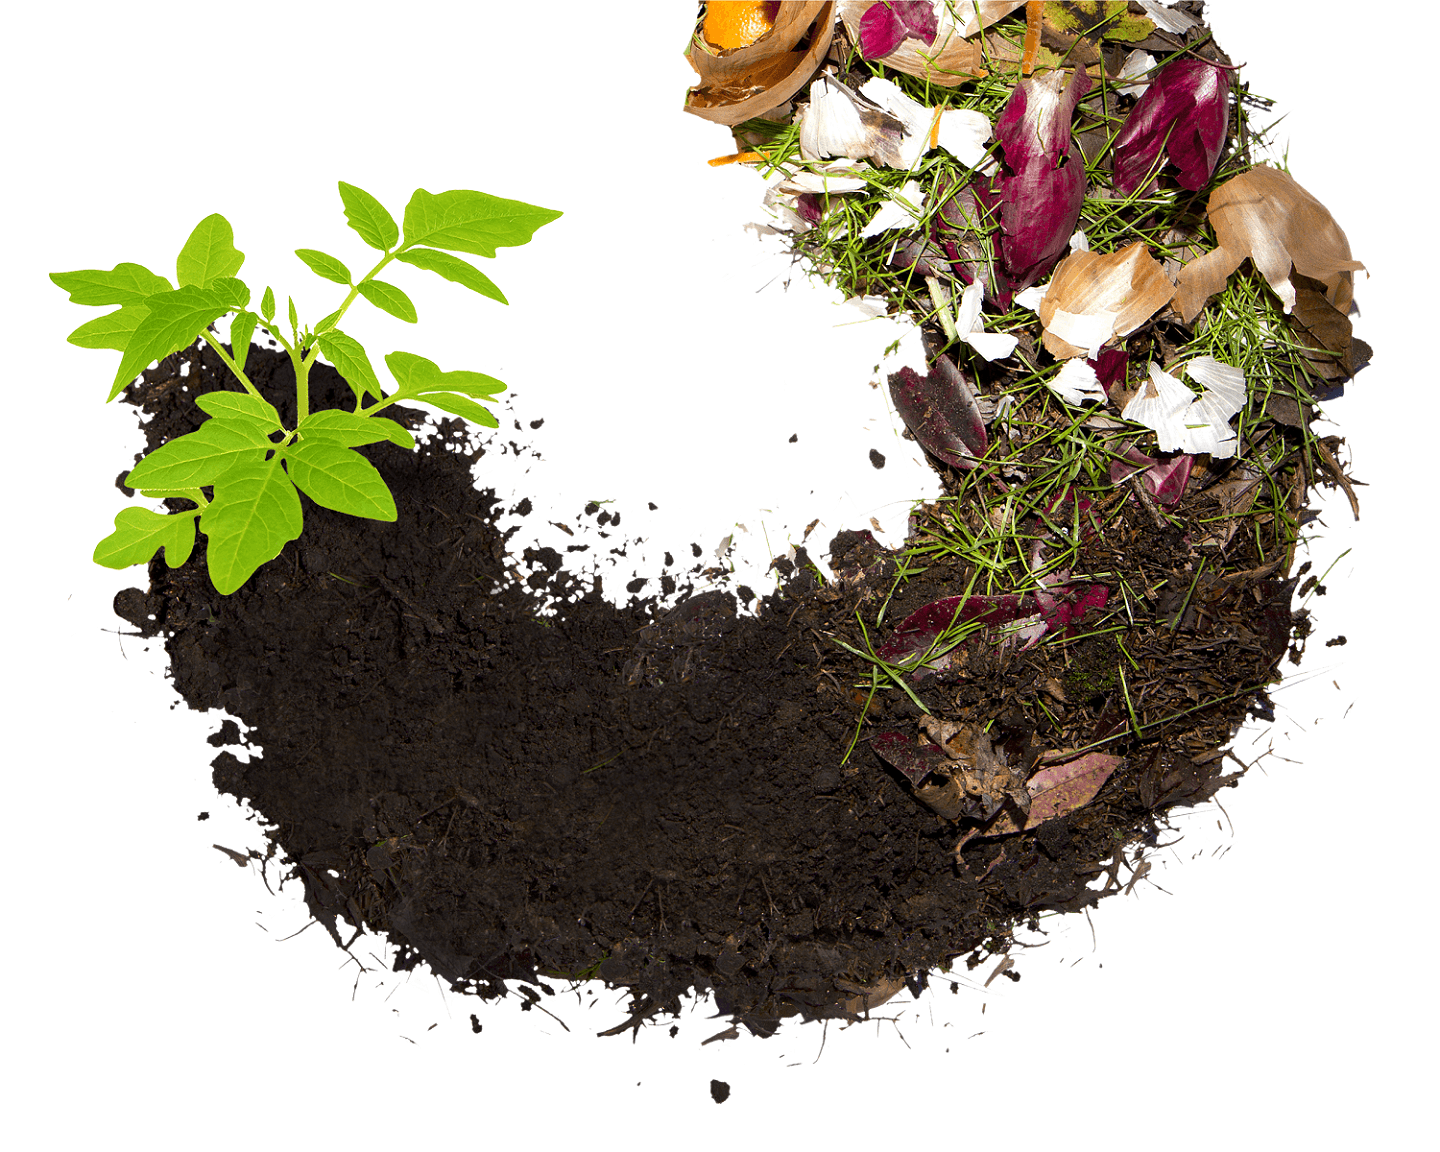 The Composting Circle of Life